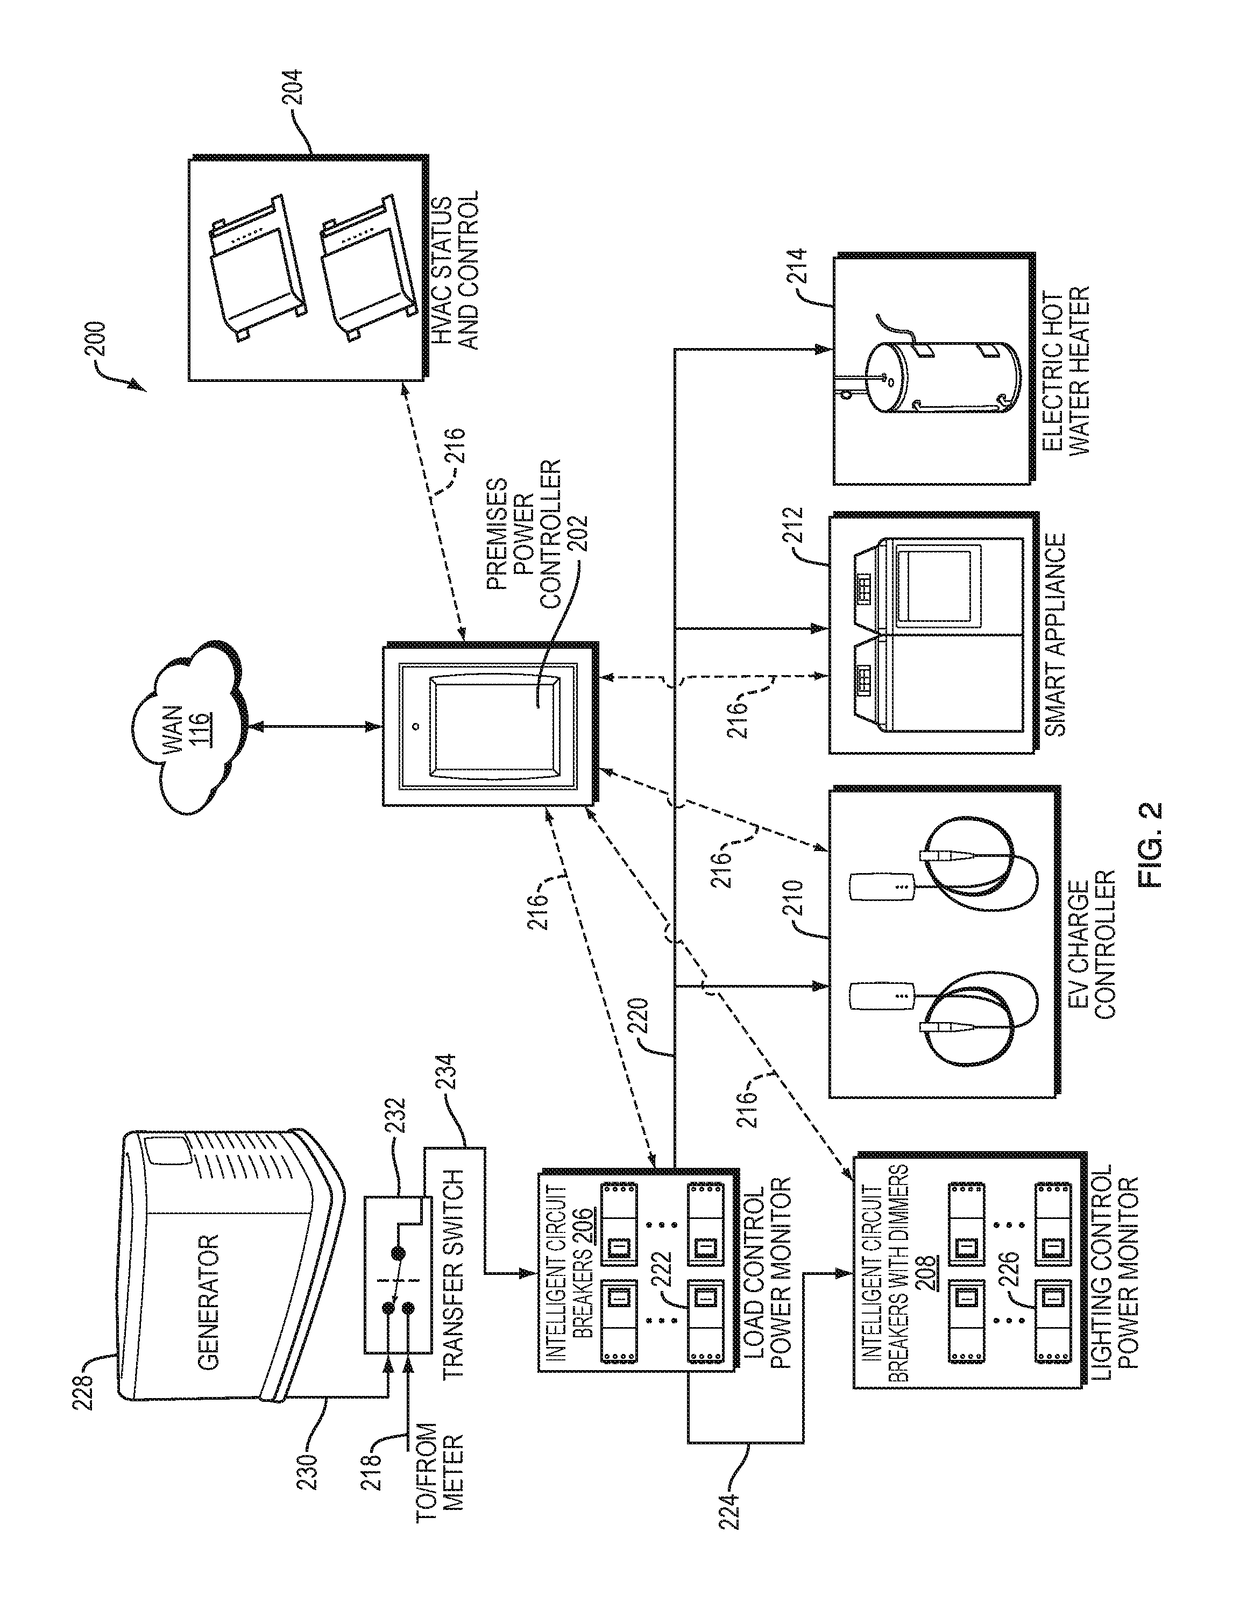 System and methods for creating dynamic NANO grids and for aggregating electric power consumers to participate in energy markets